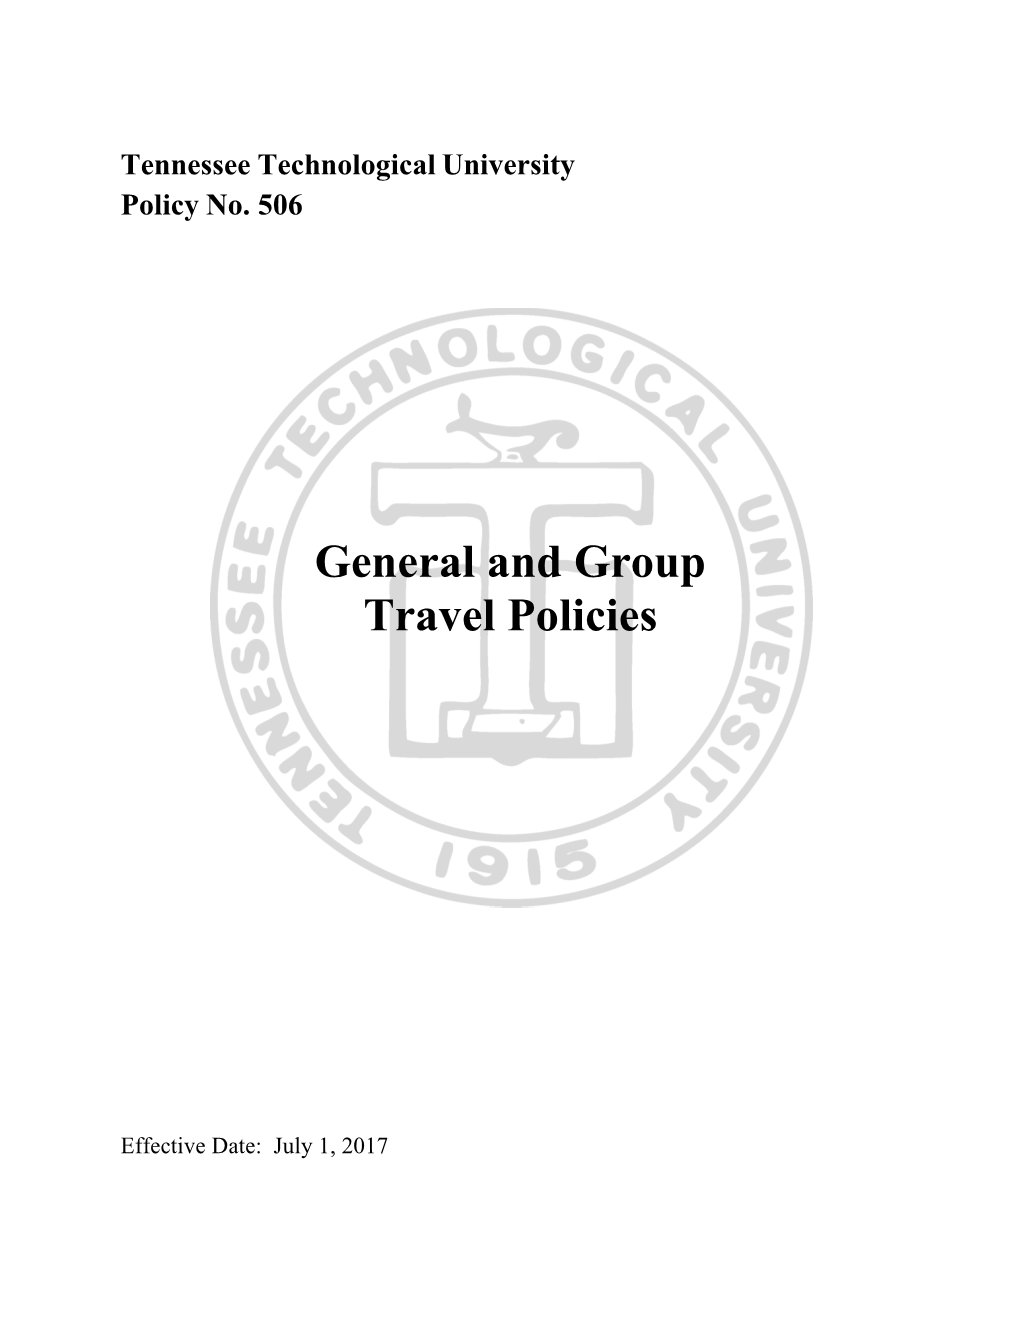 506: General and Group Travel Policies